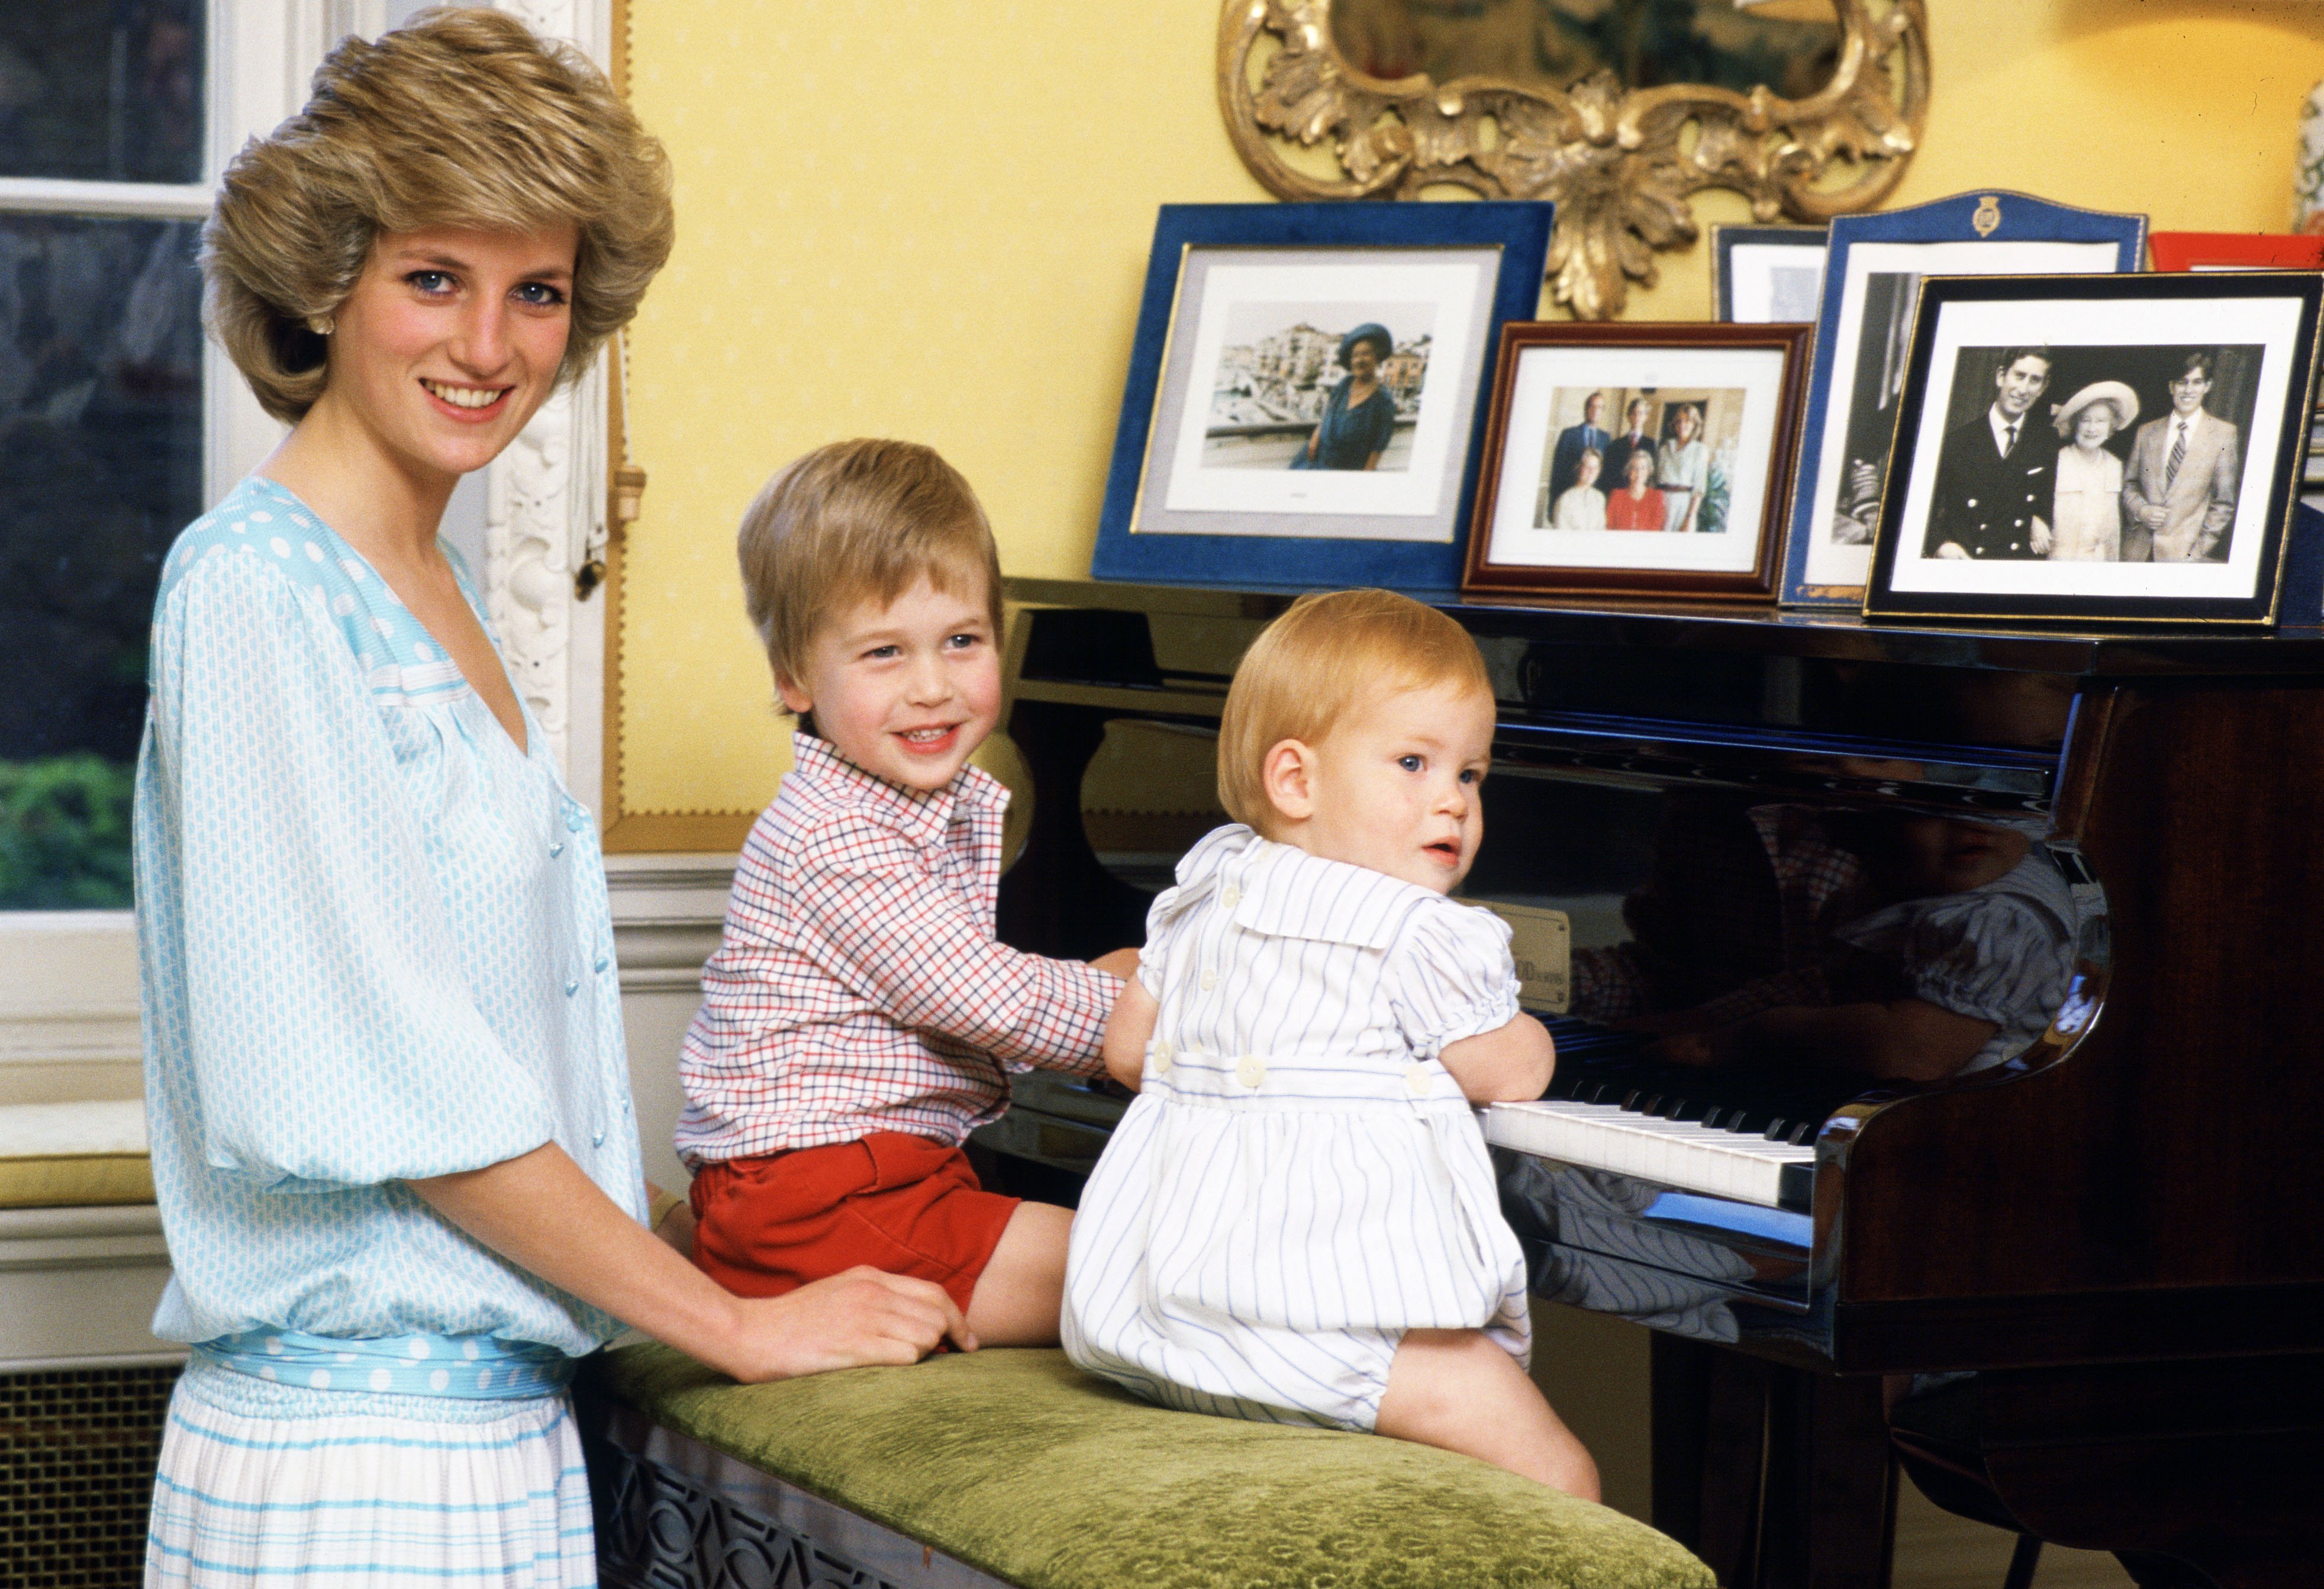 Diana, Princess of Wales with her sons, Prince William and Prince Harry, at the piano in Kensington Palace. | Source: Getty Images